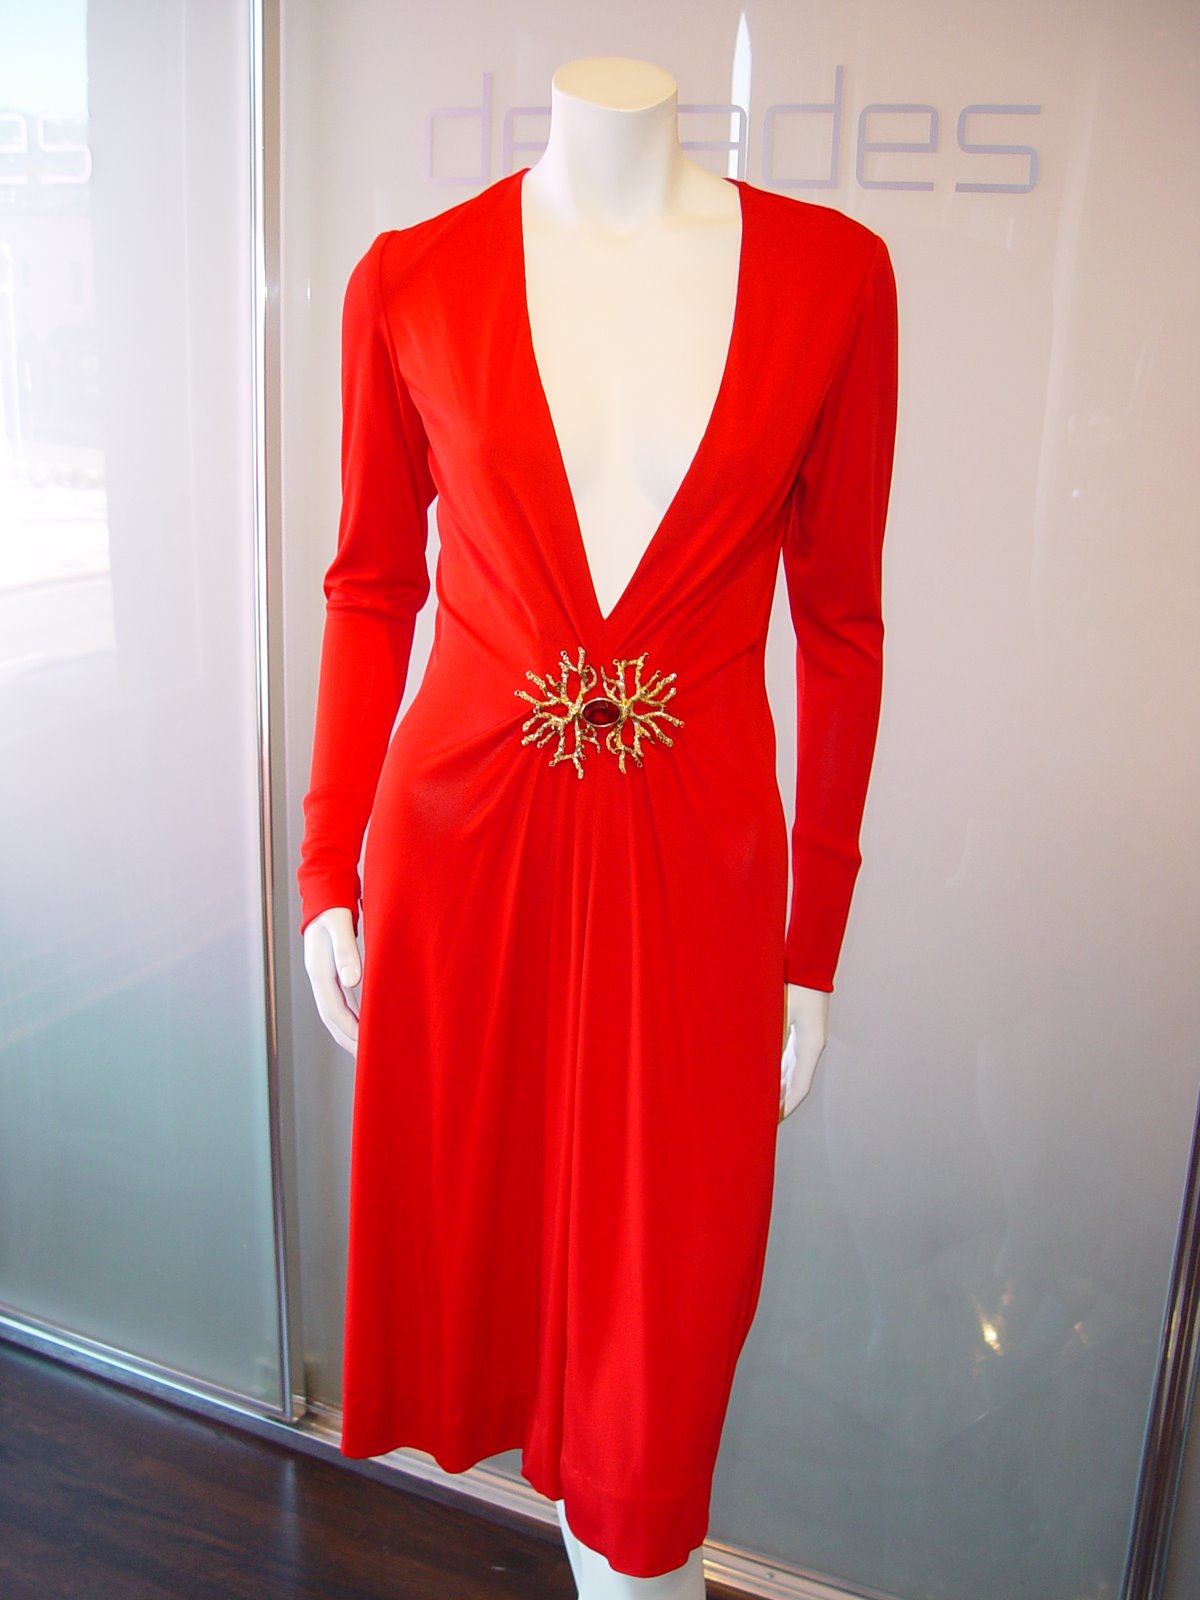 [YSL+RIVE+GAUCHE+RED+JERSEY+COCKTAIL+DRESS+WITH+GOOSENS+DESIGNED+BROOCH+SIZE+36+C+EARLY+80S.JPG.JPG]